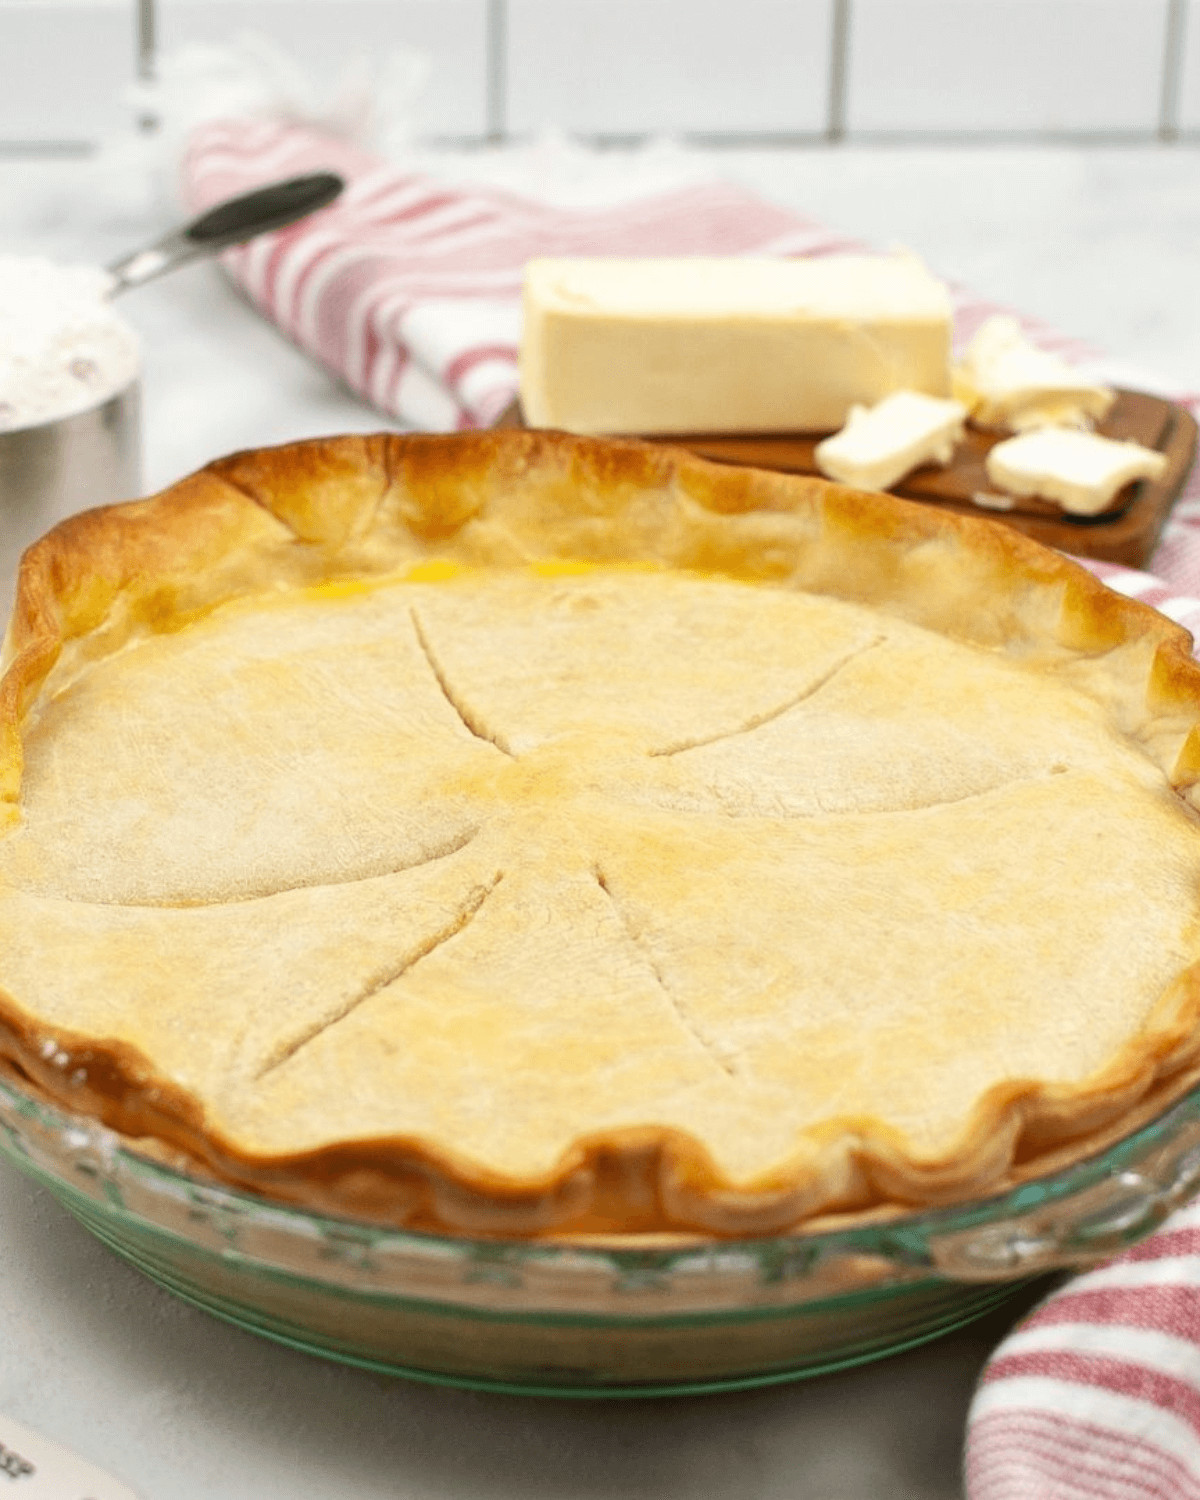 A side view of the cooked pie.